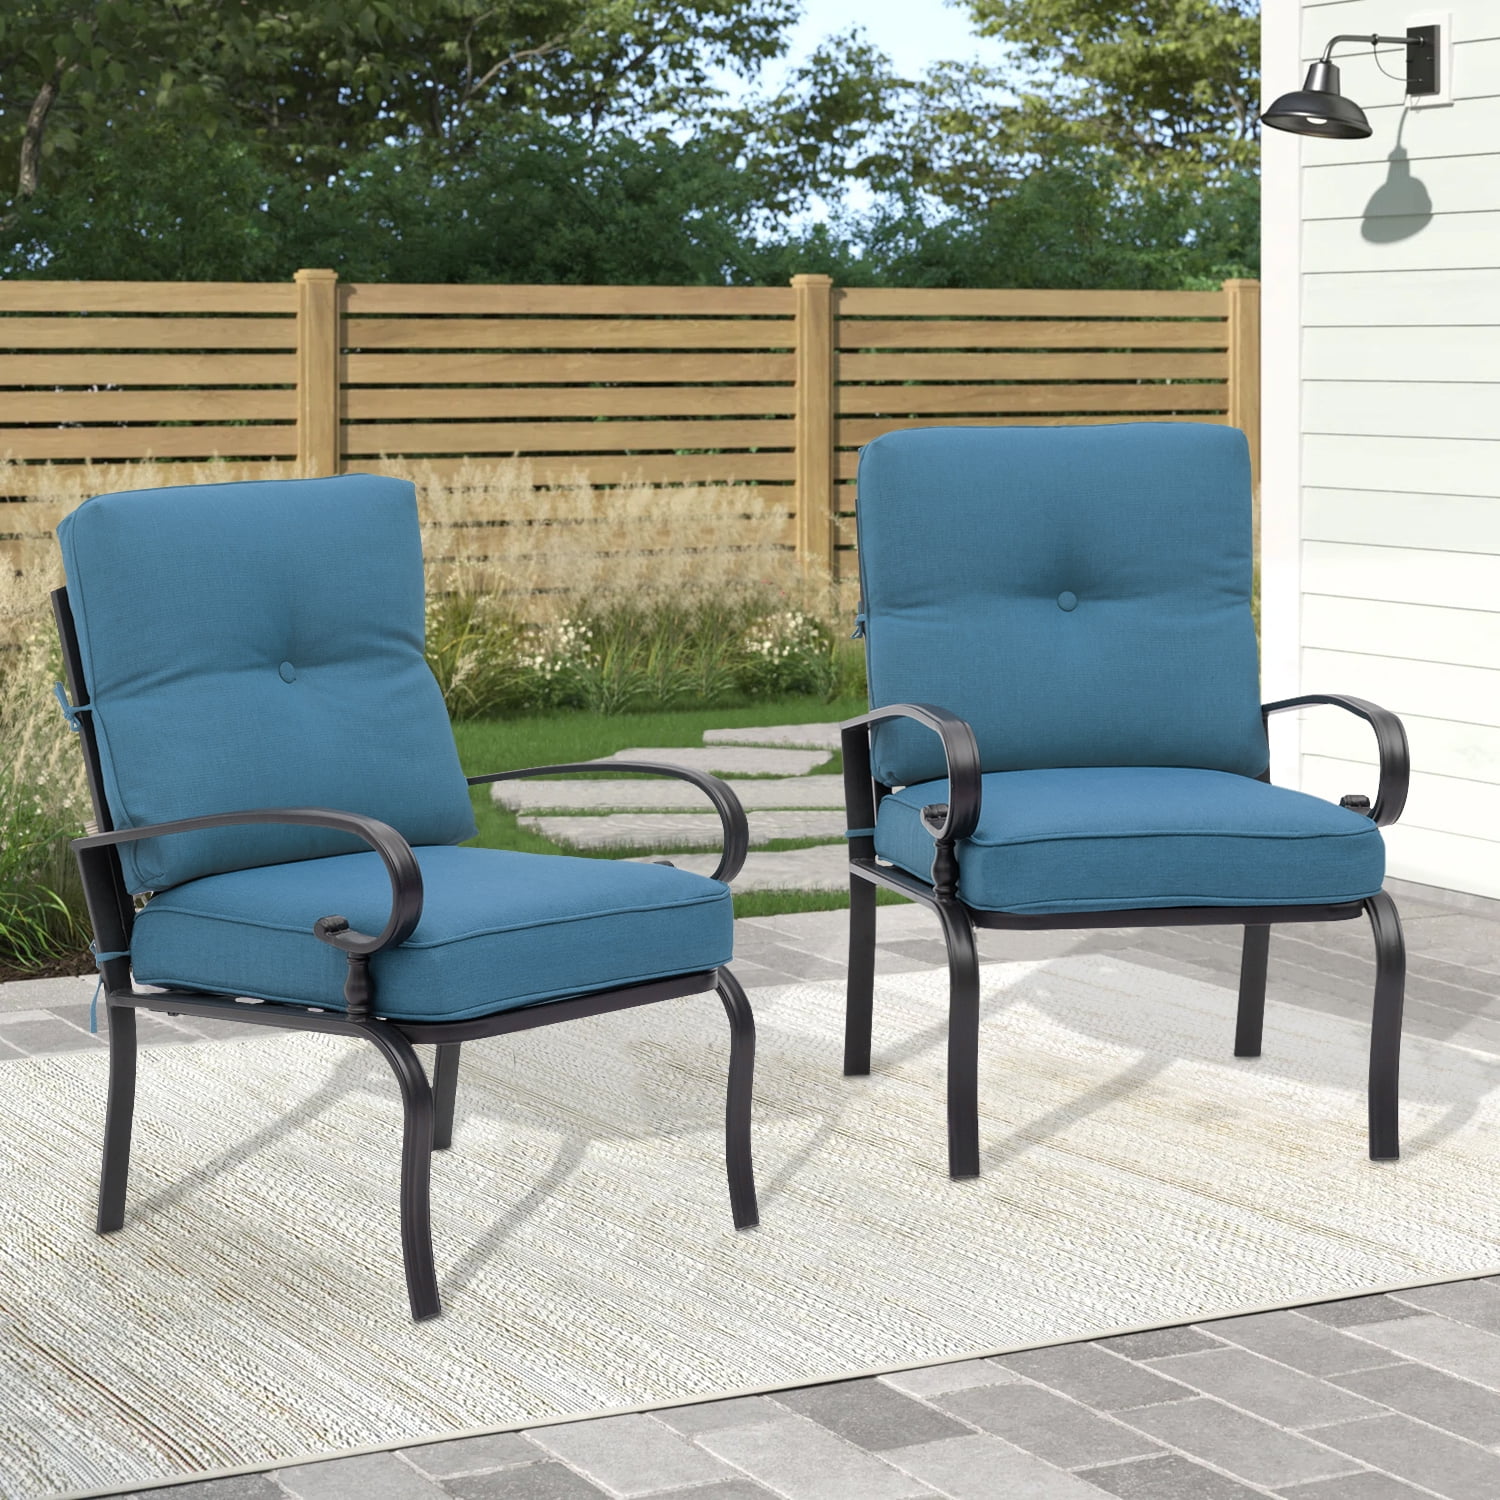 SOLAURA 2-Piece Outdoor Patio Metal Dining Chairs Set of 2 with Peacock ...